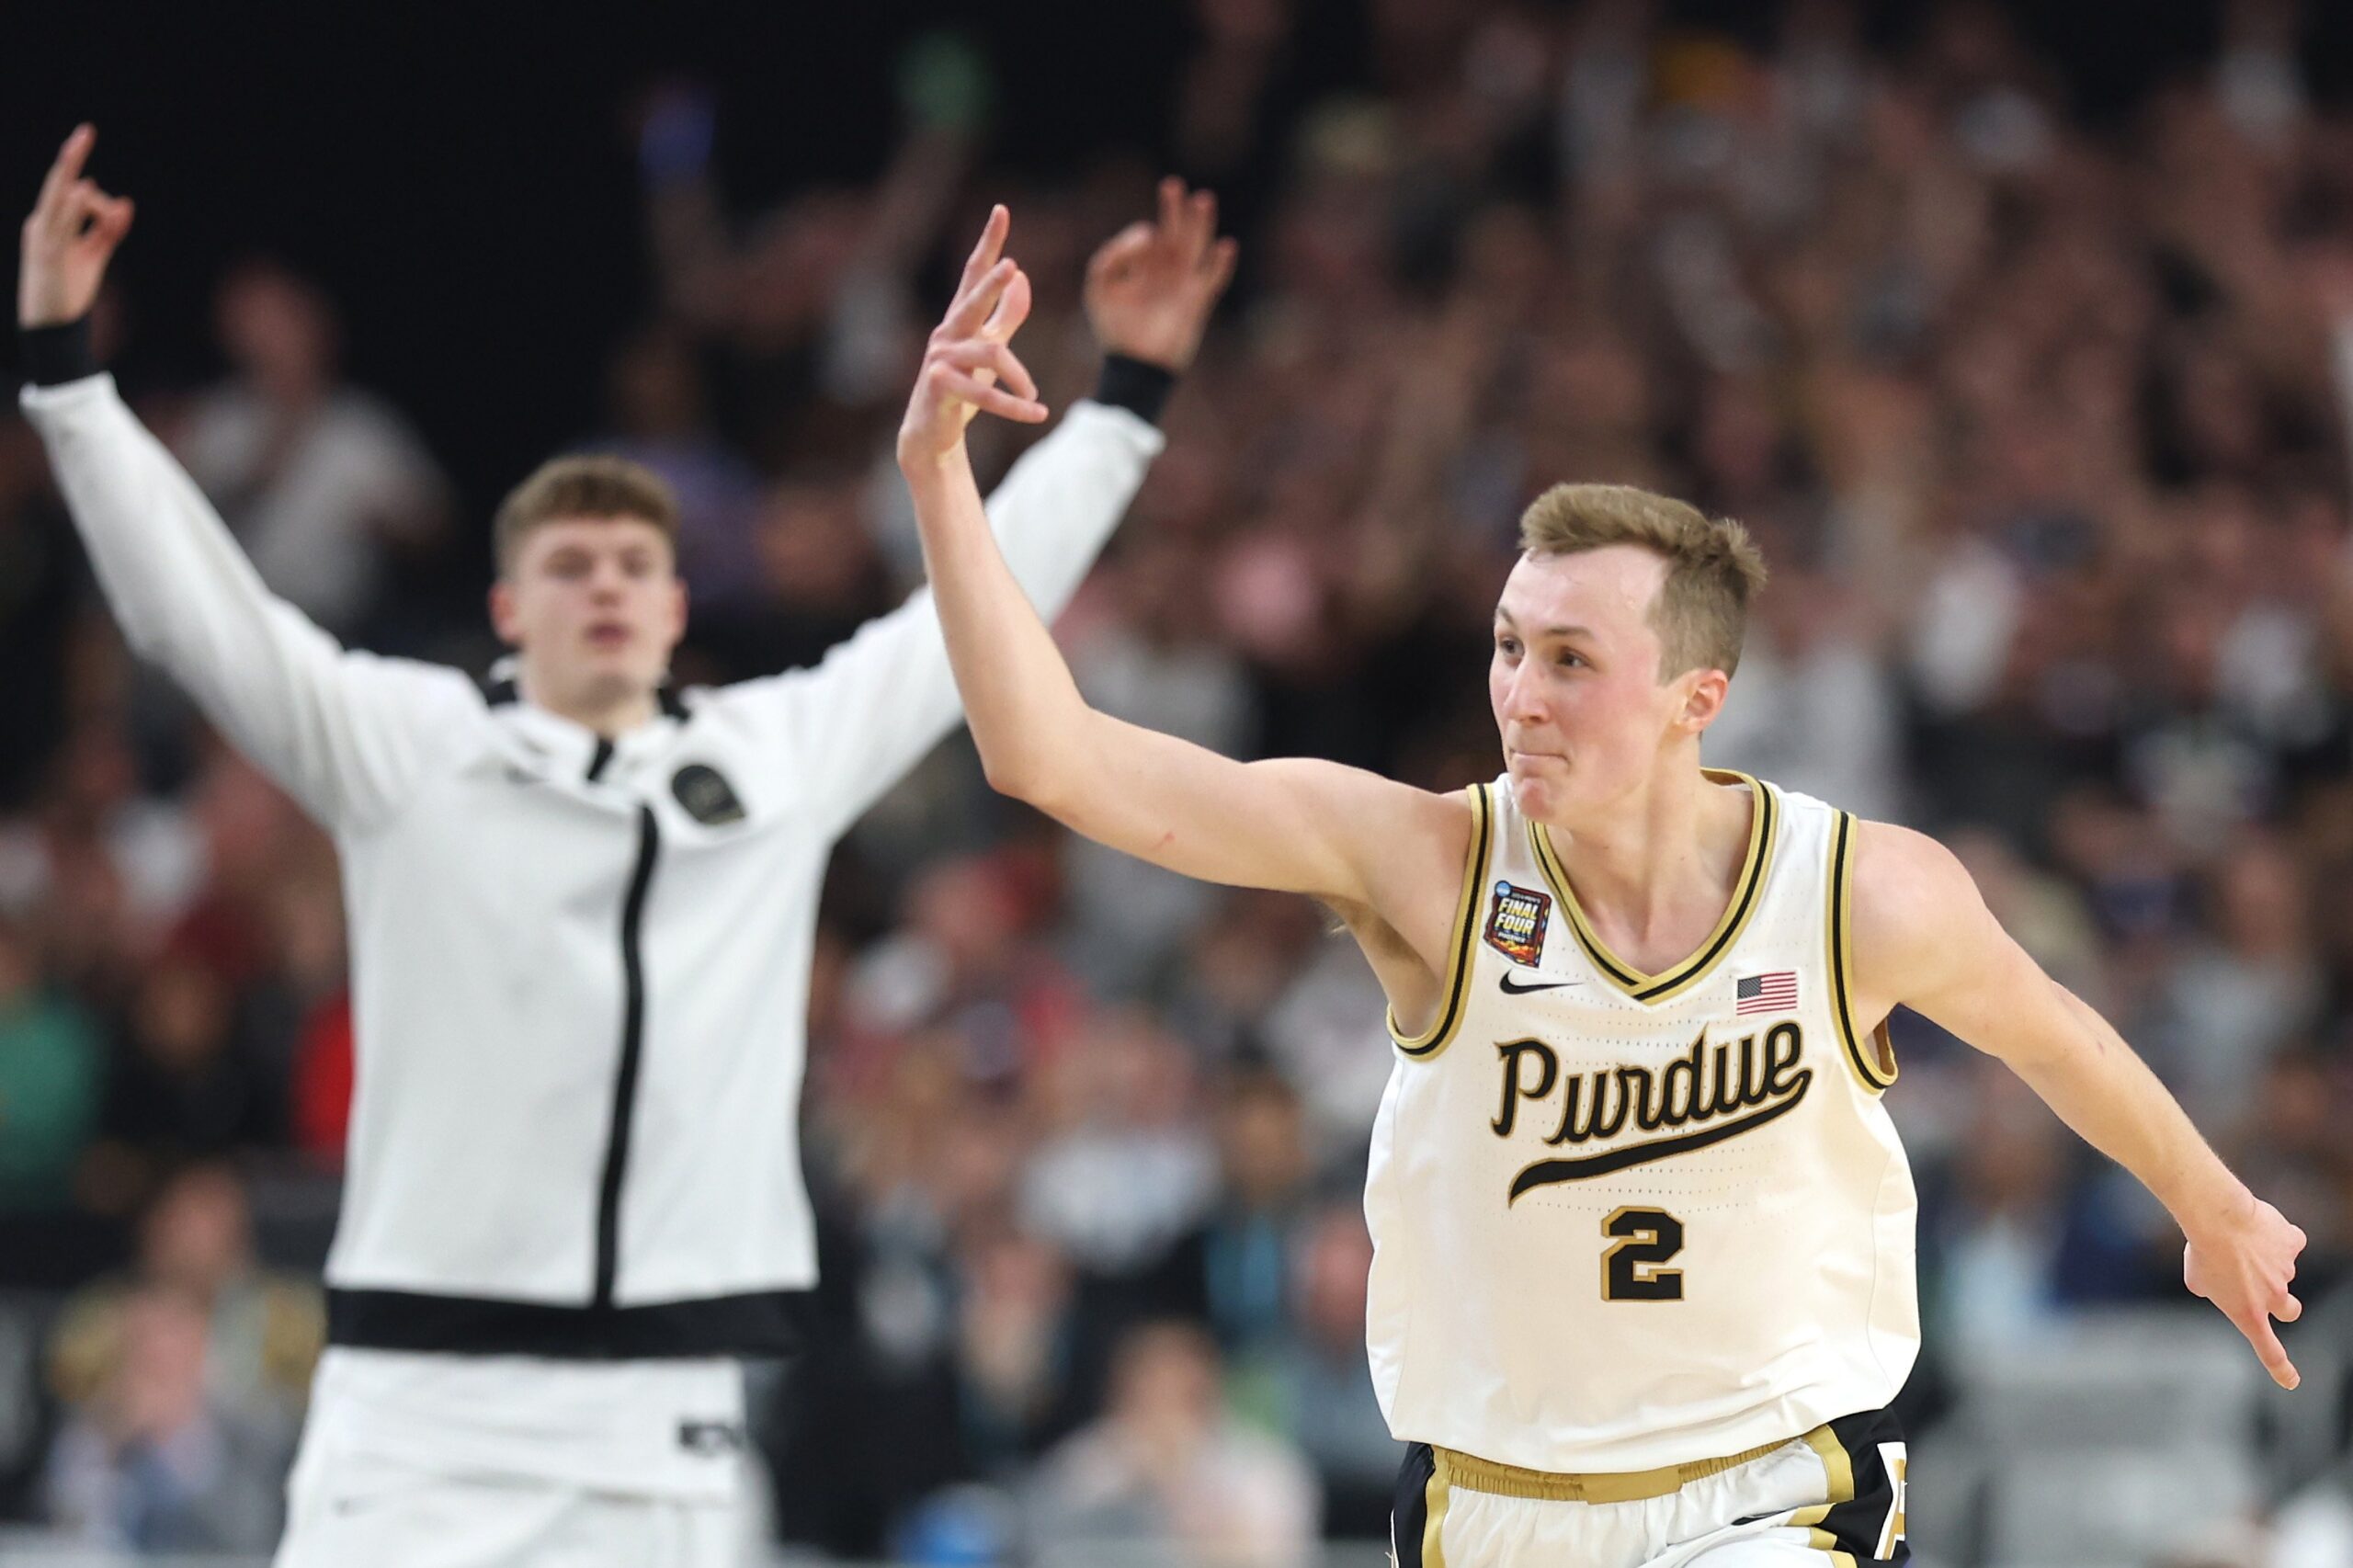 Fletcher Loyer #2 of the Purdue Boilermakers celebrates after making a shot in the second half against the North Carolina State Wolfpack in the NCAA Men's Basketball Tournament Final Four semifinal game at State Farm Stadium on April 6, 2024, in Glendale, Arizona.